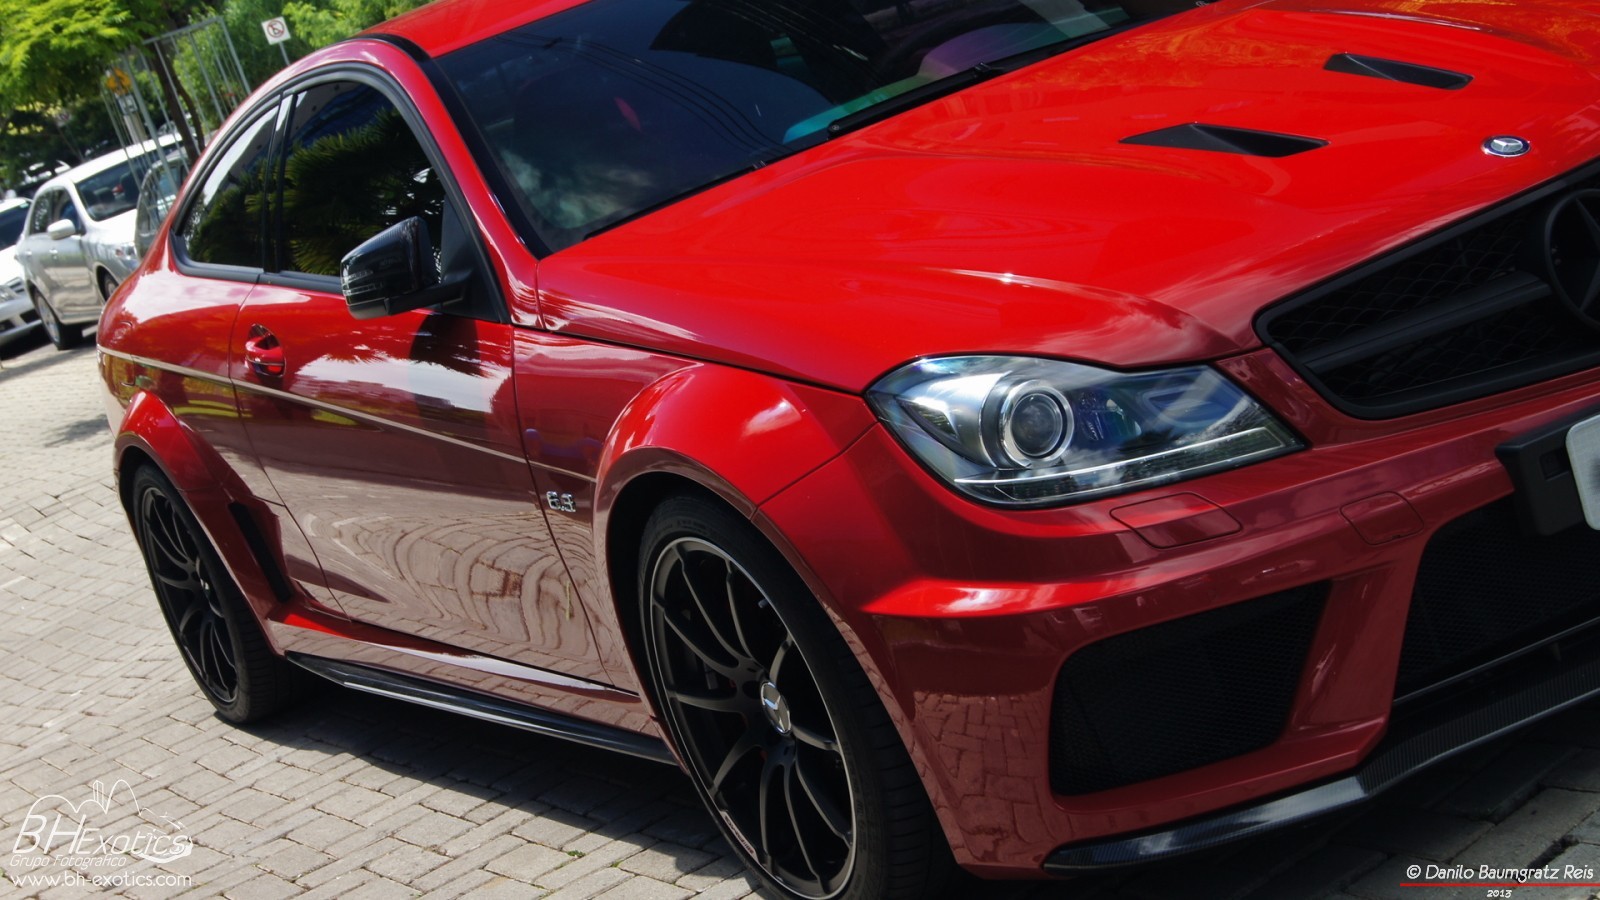 Mercedes Benz C63 AMG AMG Line Mercedes Benz Car Vehicle Red Cars 2013 Year 1600x900